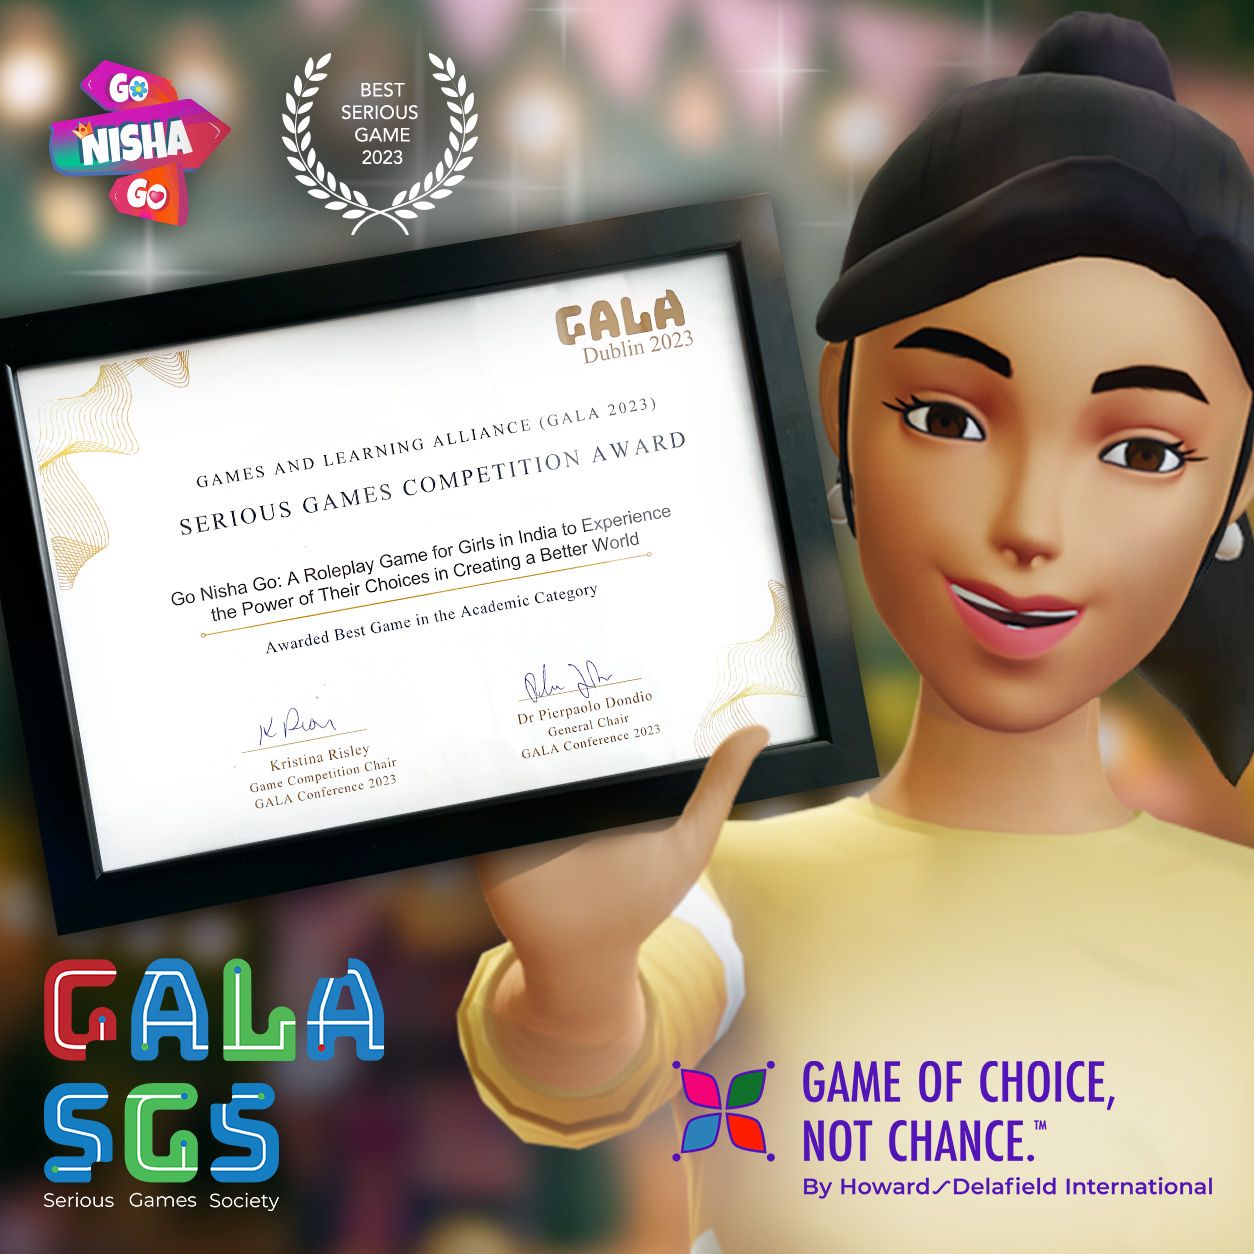 Go Nisha Go Wins 'Best Serious Game' at the Gala2023 Serious Games Competition